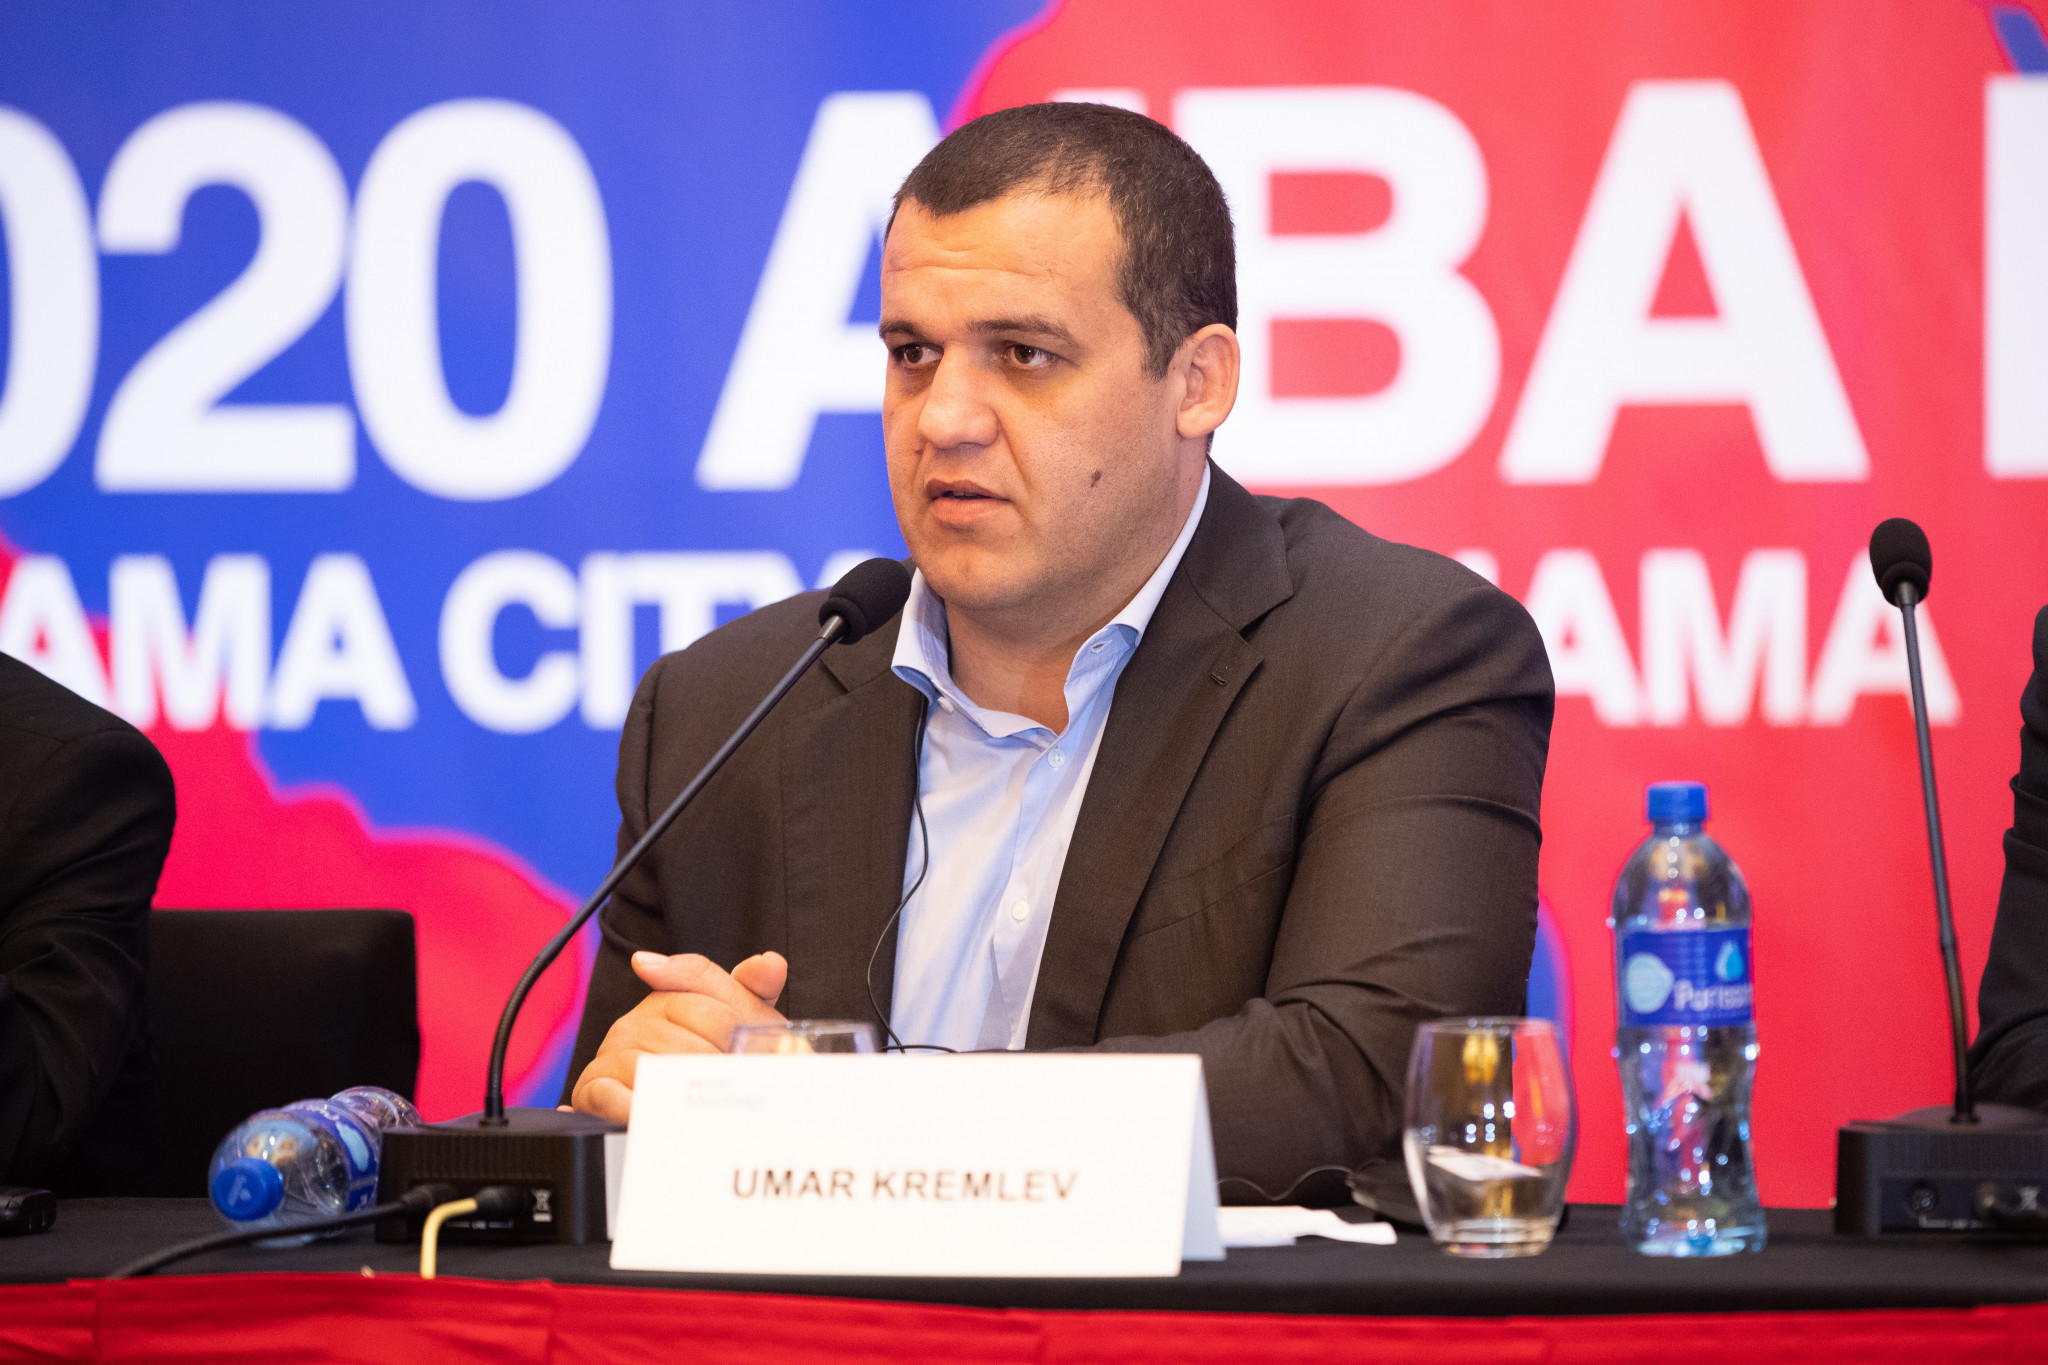 Umar Kremlev left a vacancy on the EUBC Executive Committee after he was elected AIBA President ©AIBA